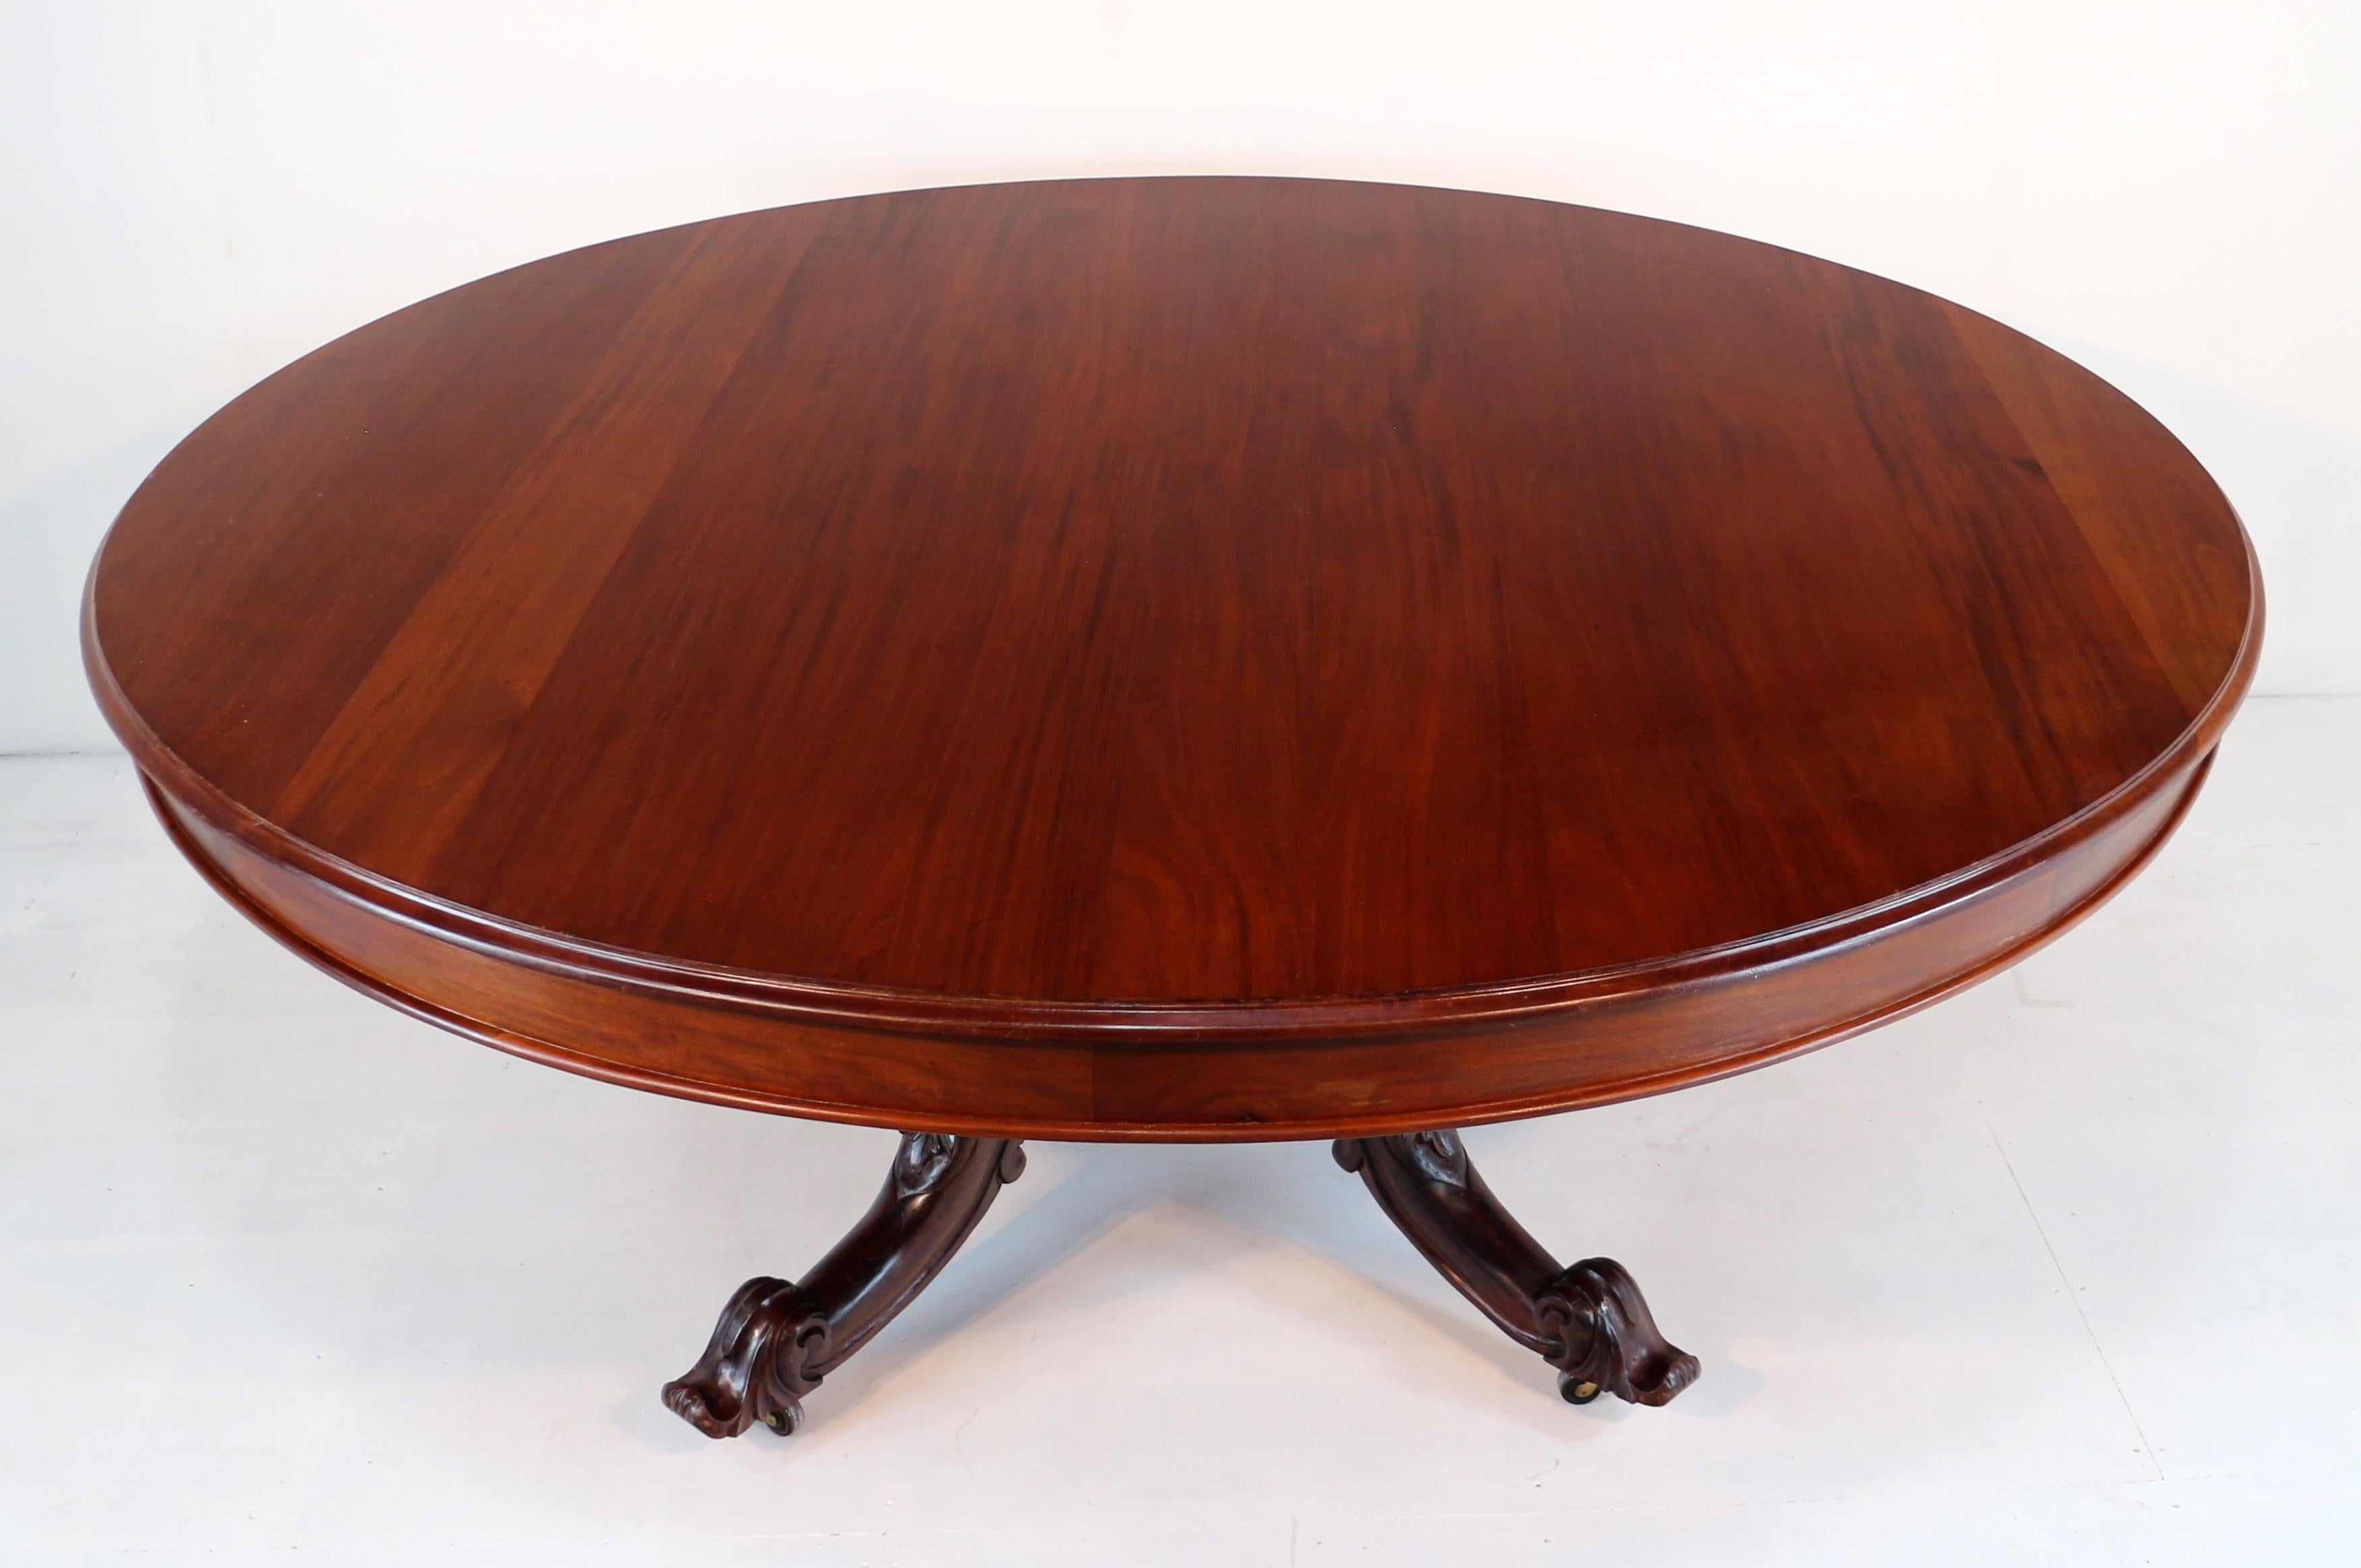 Large Victorian Style Mahogany Circular Centre Table - 6ft7 / 2m diameter In Good Condition For Sale In Glasgow, GB